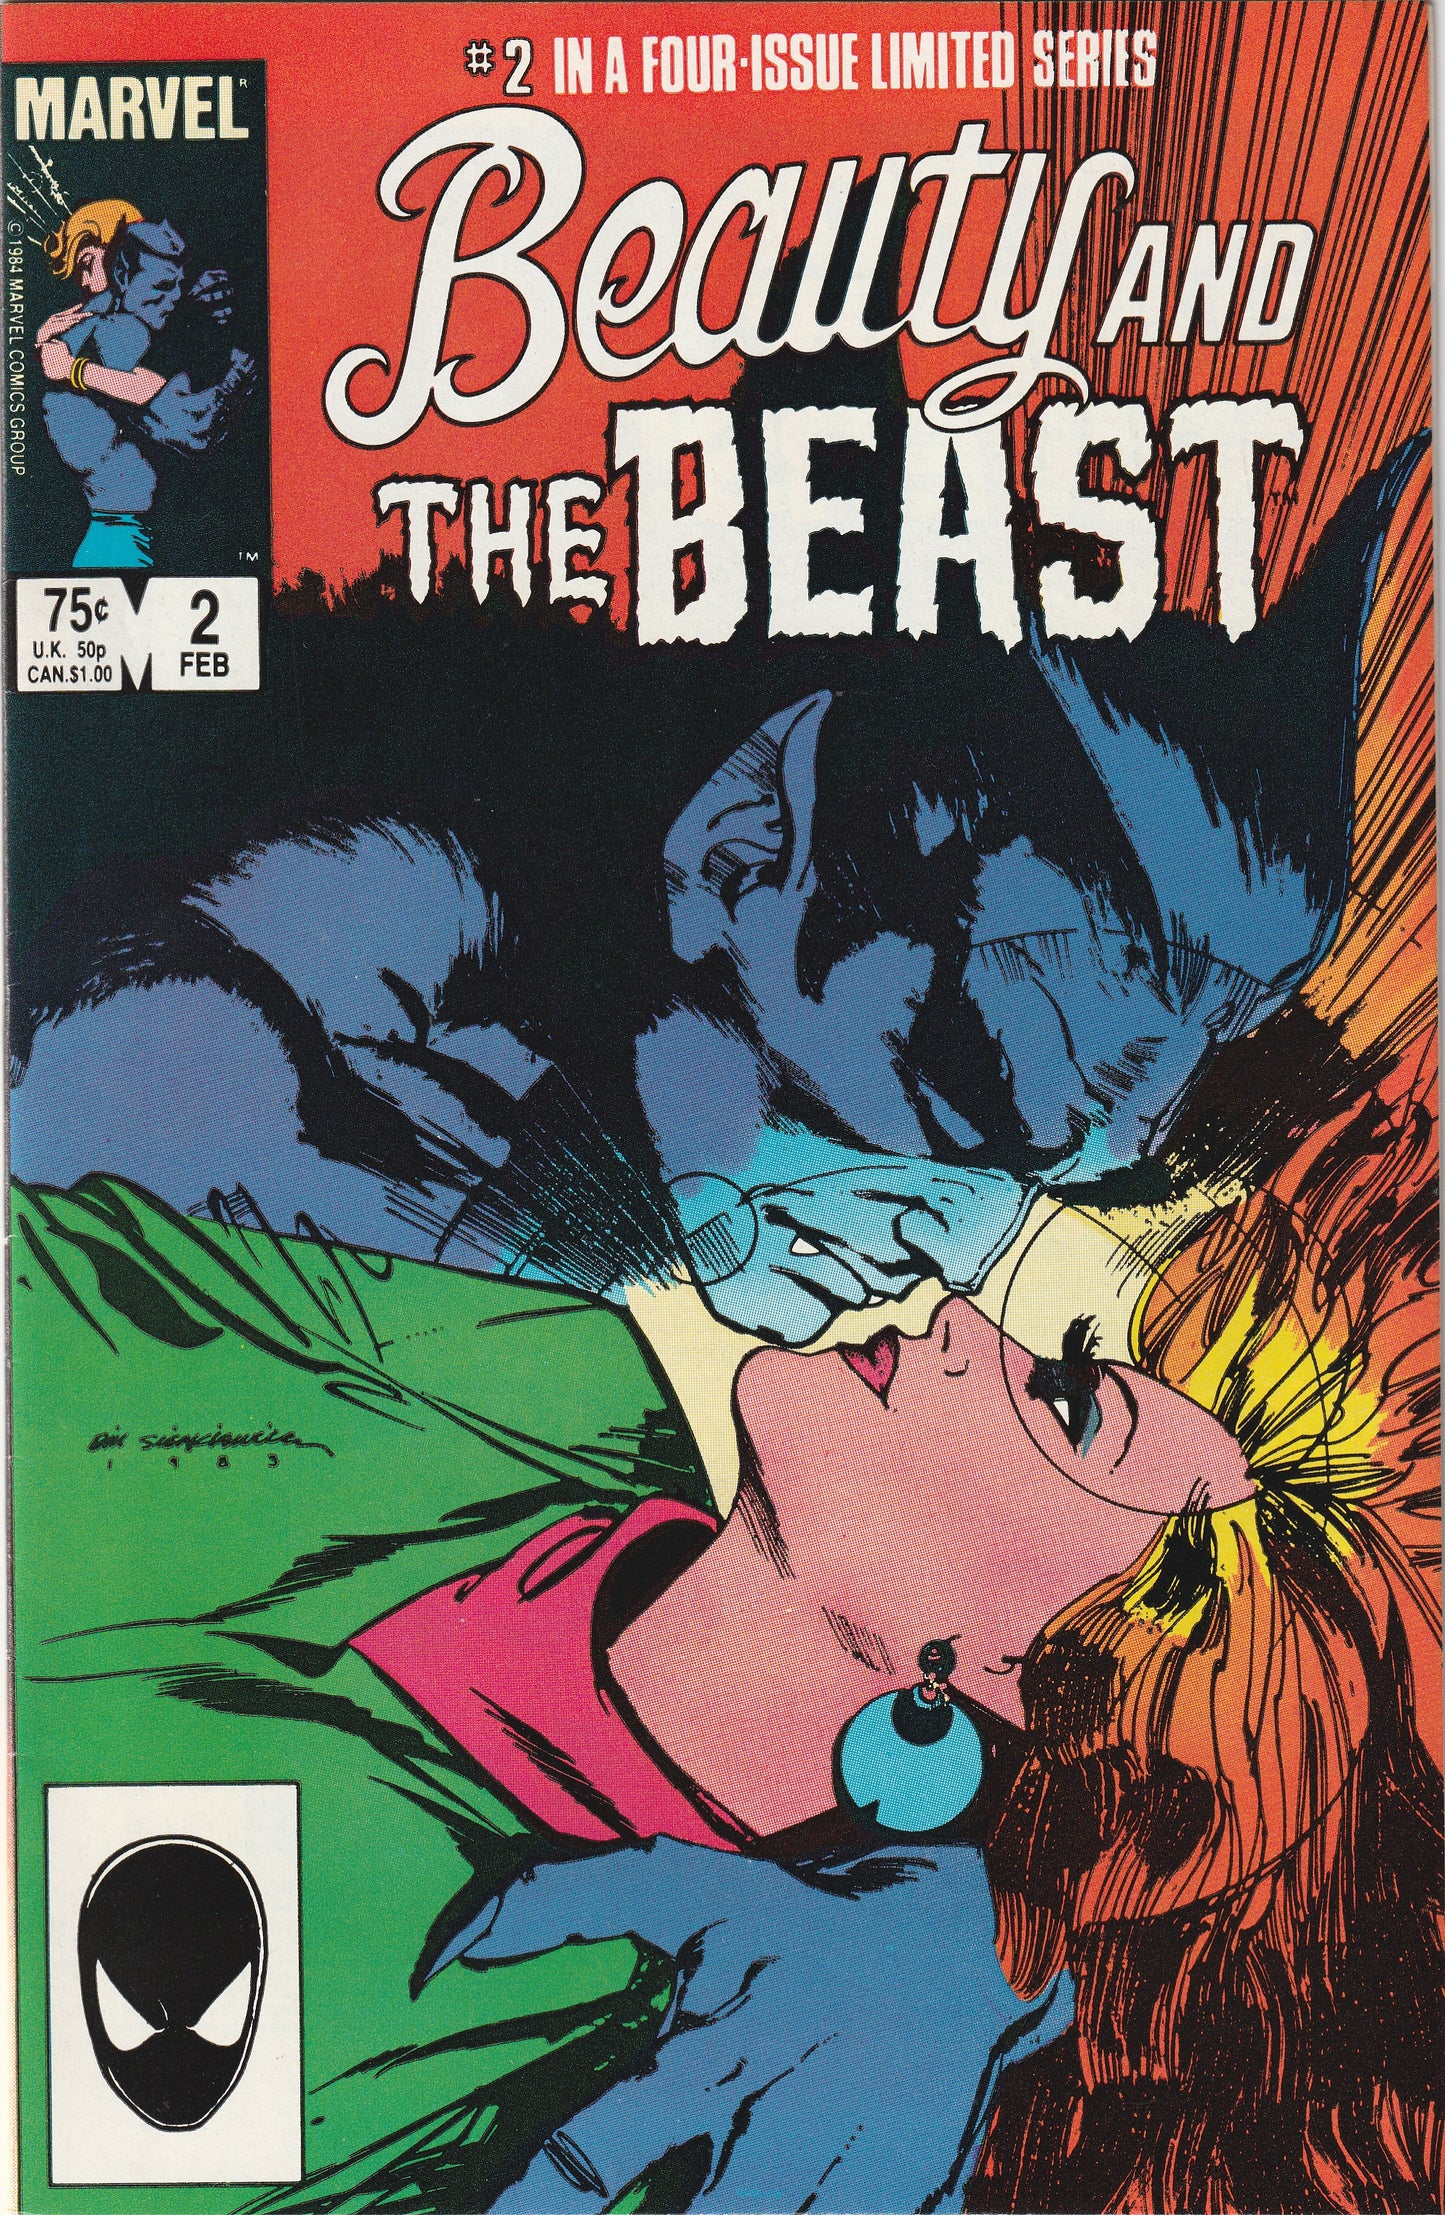 Beauty and the Beast (1985) - 4 issue mini series